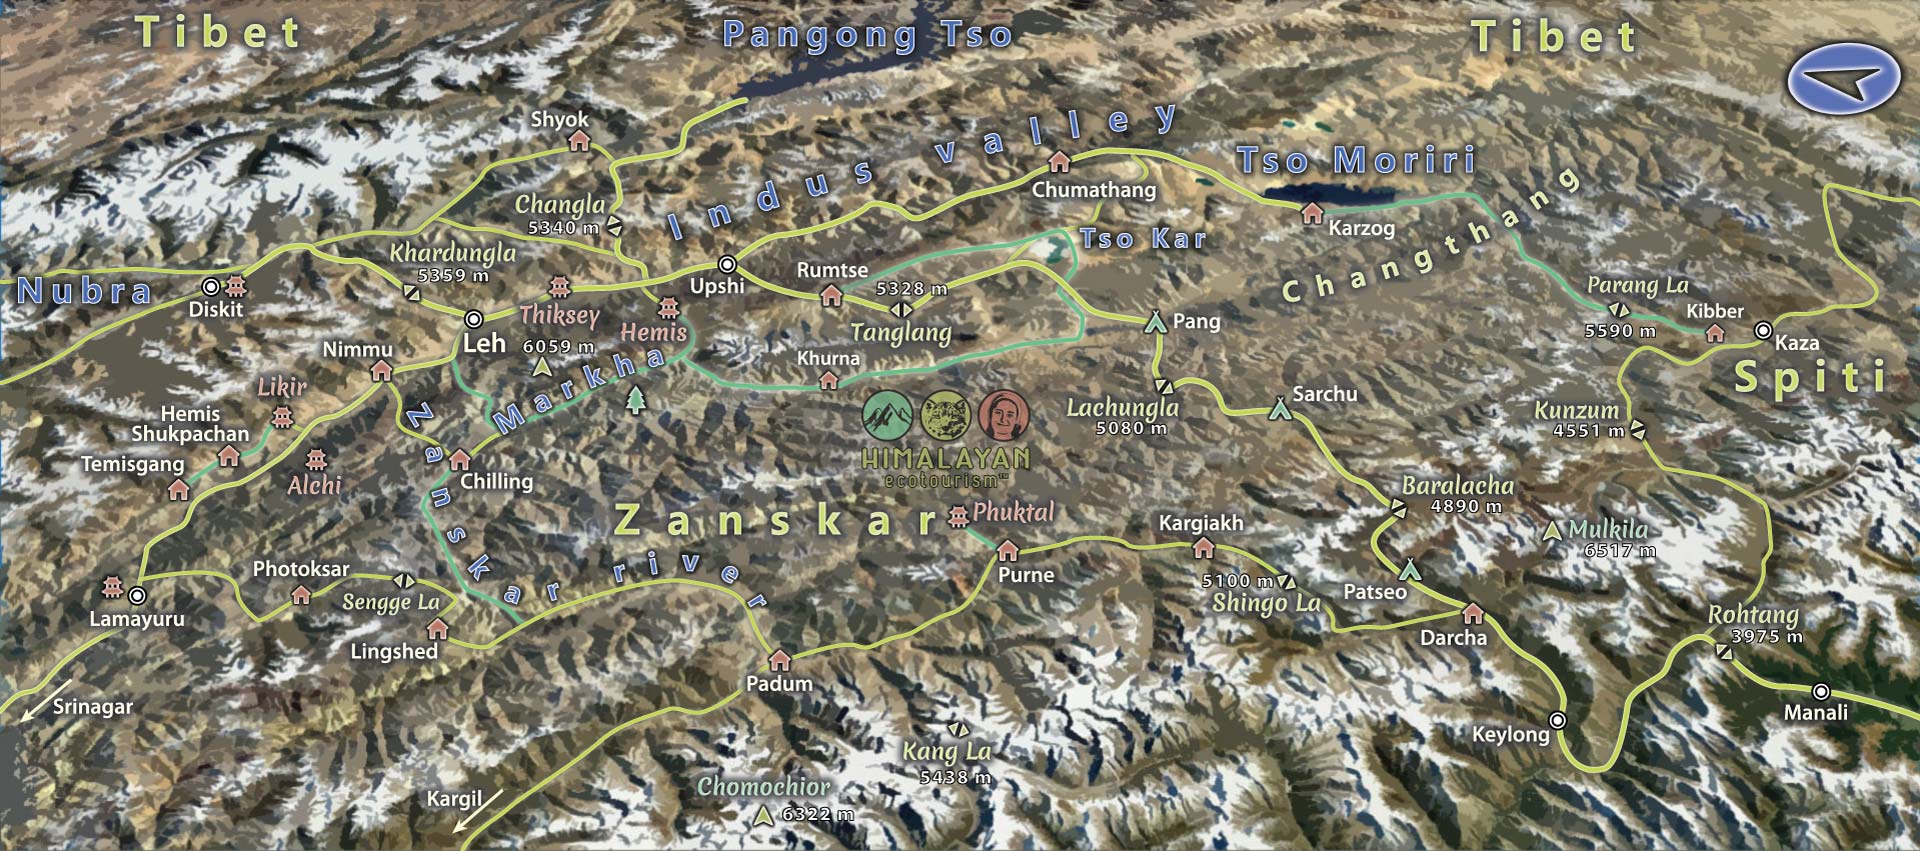 Map of Ladakh with roads and trekking routes